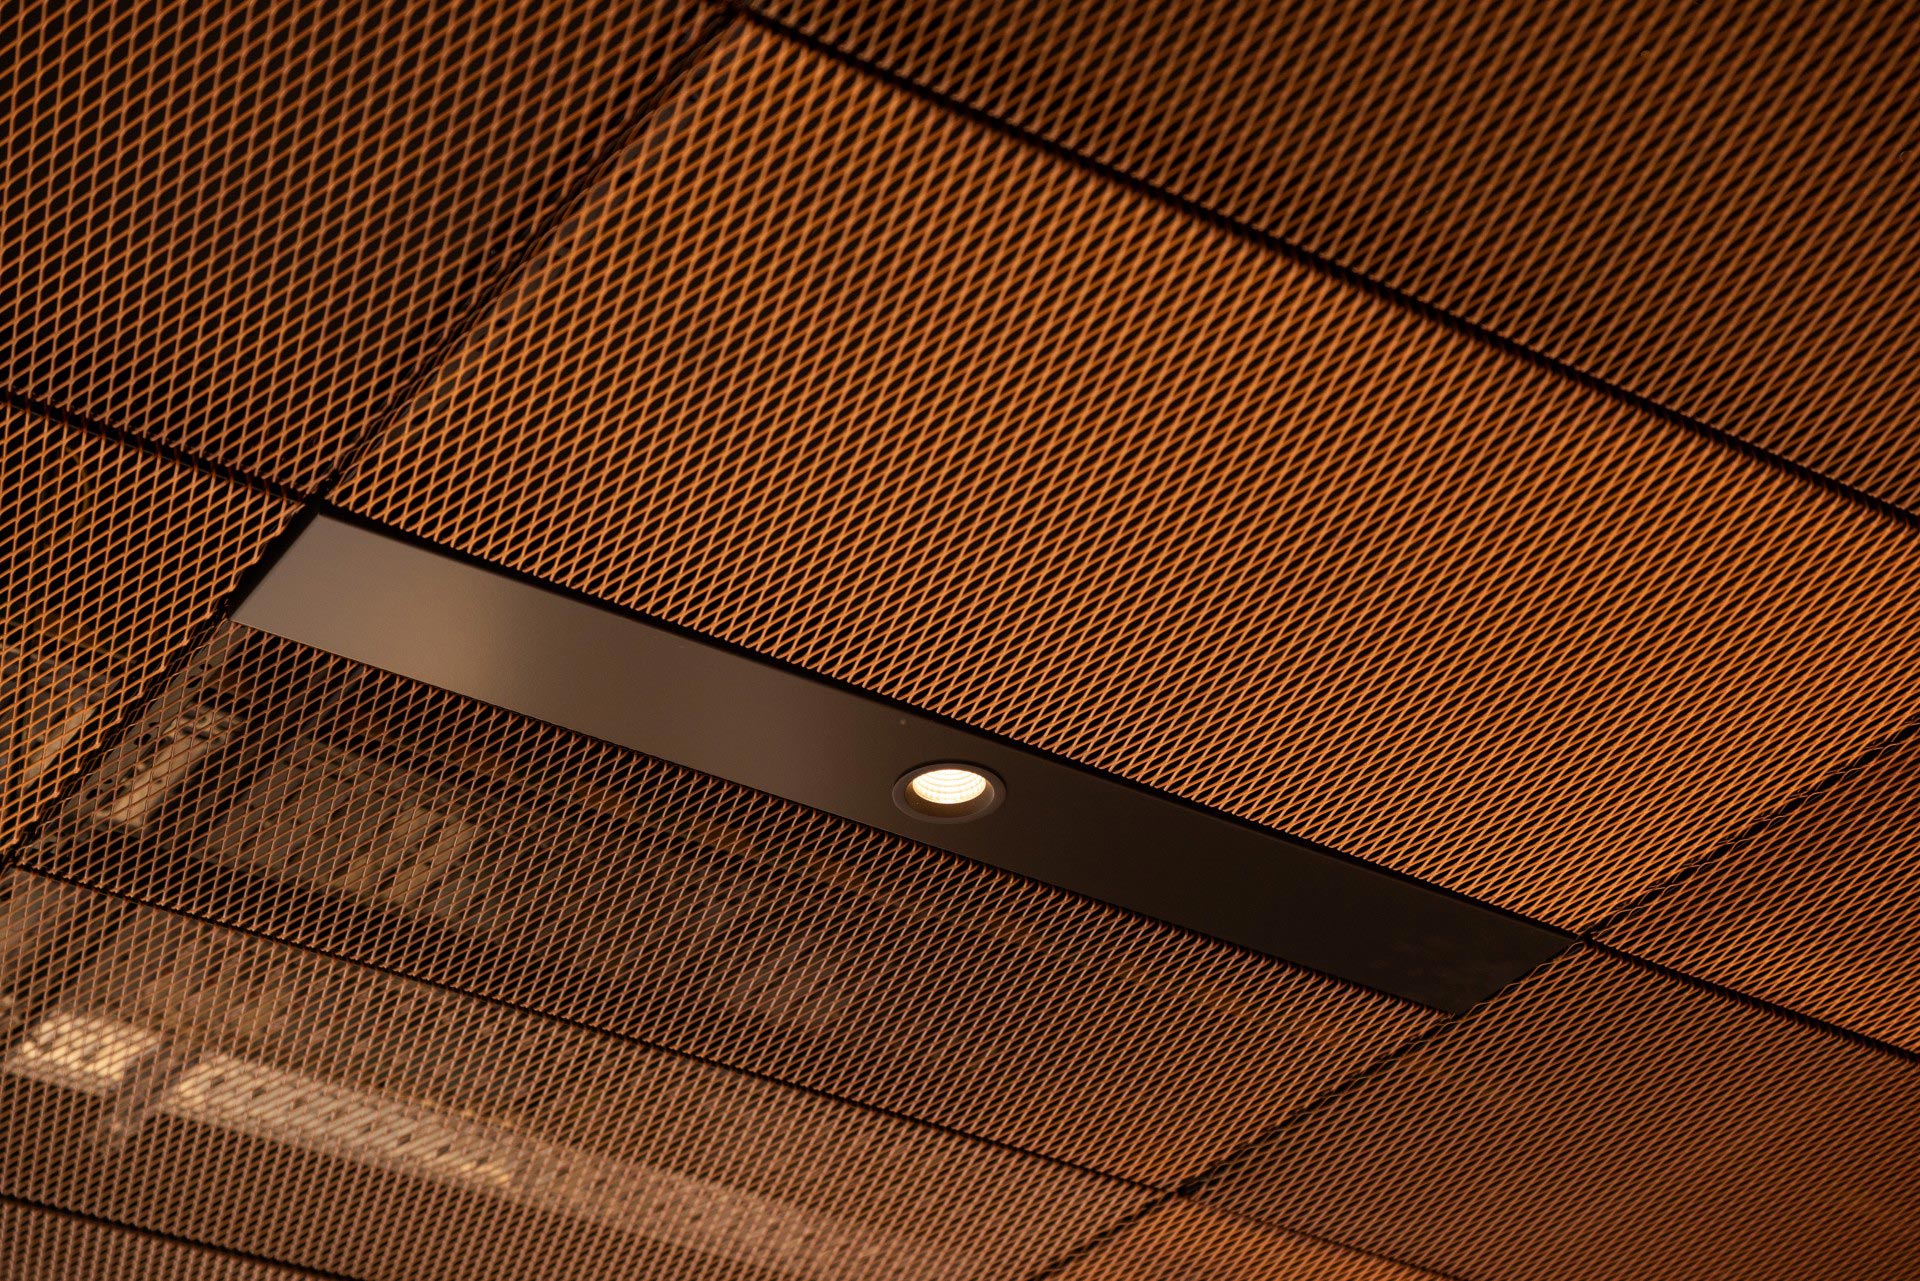 Metal mesh ceiling in National Library in Warsaw, Poland